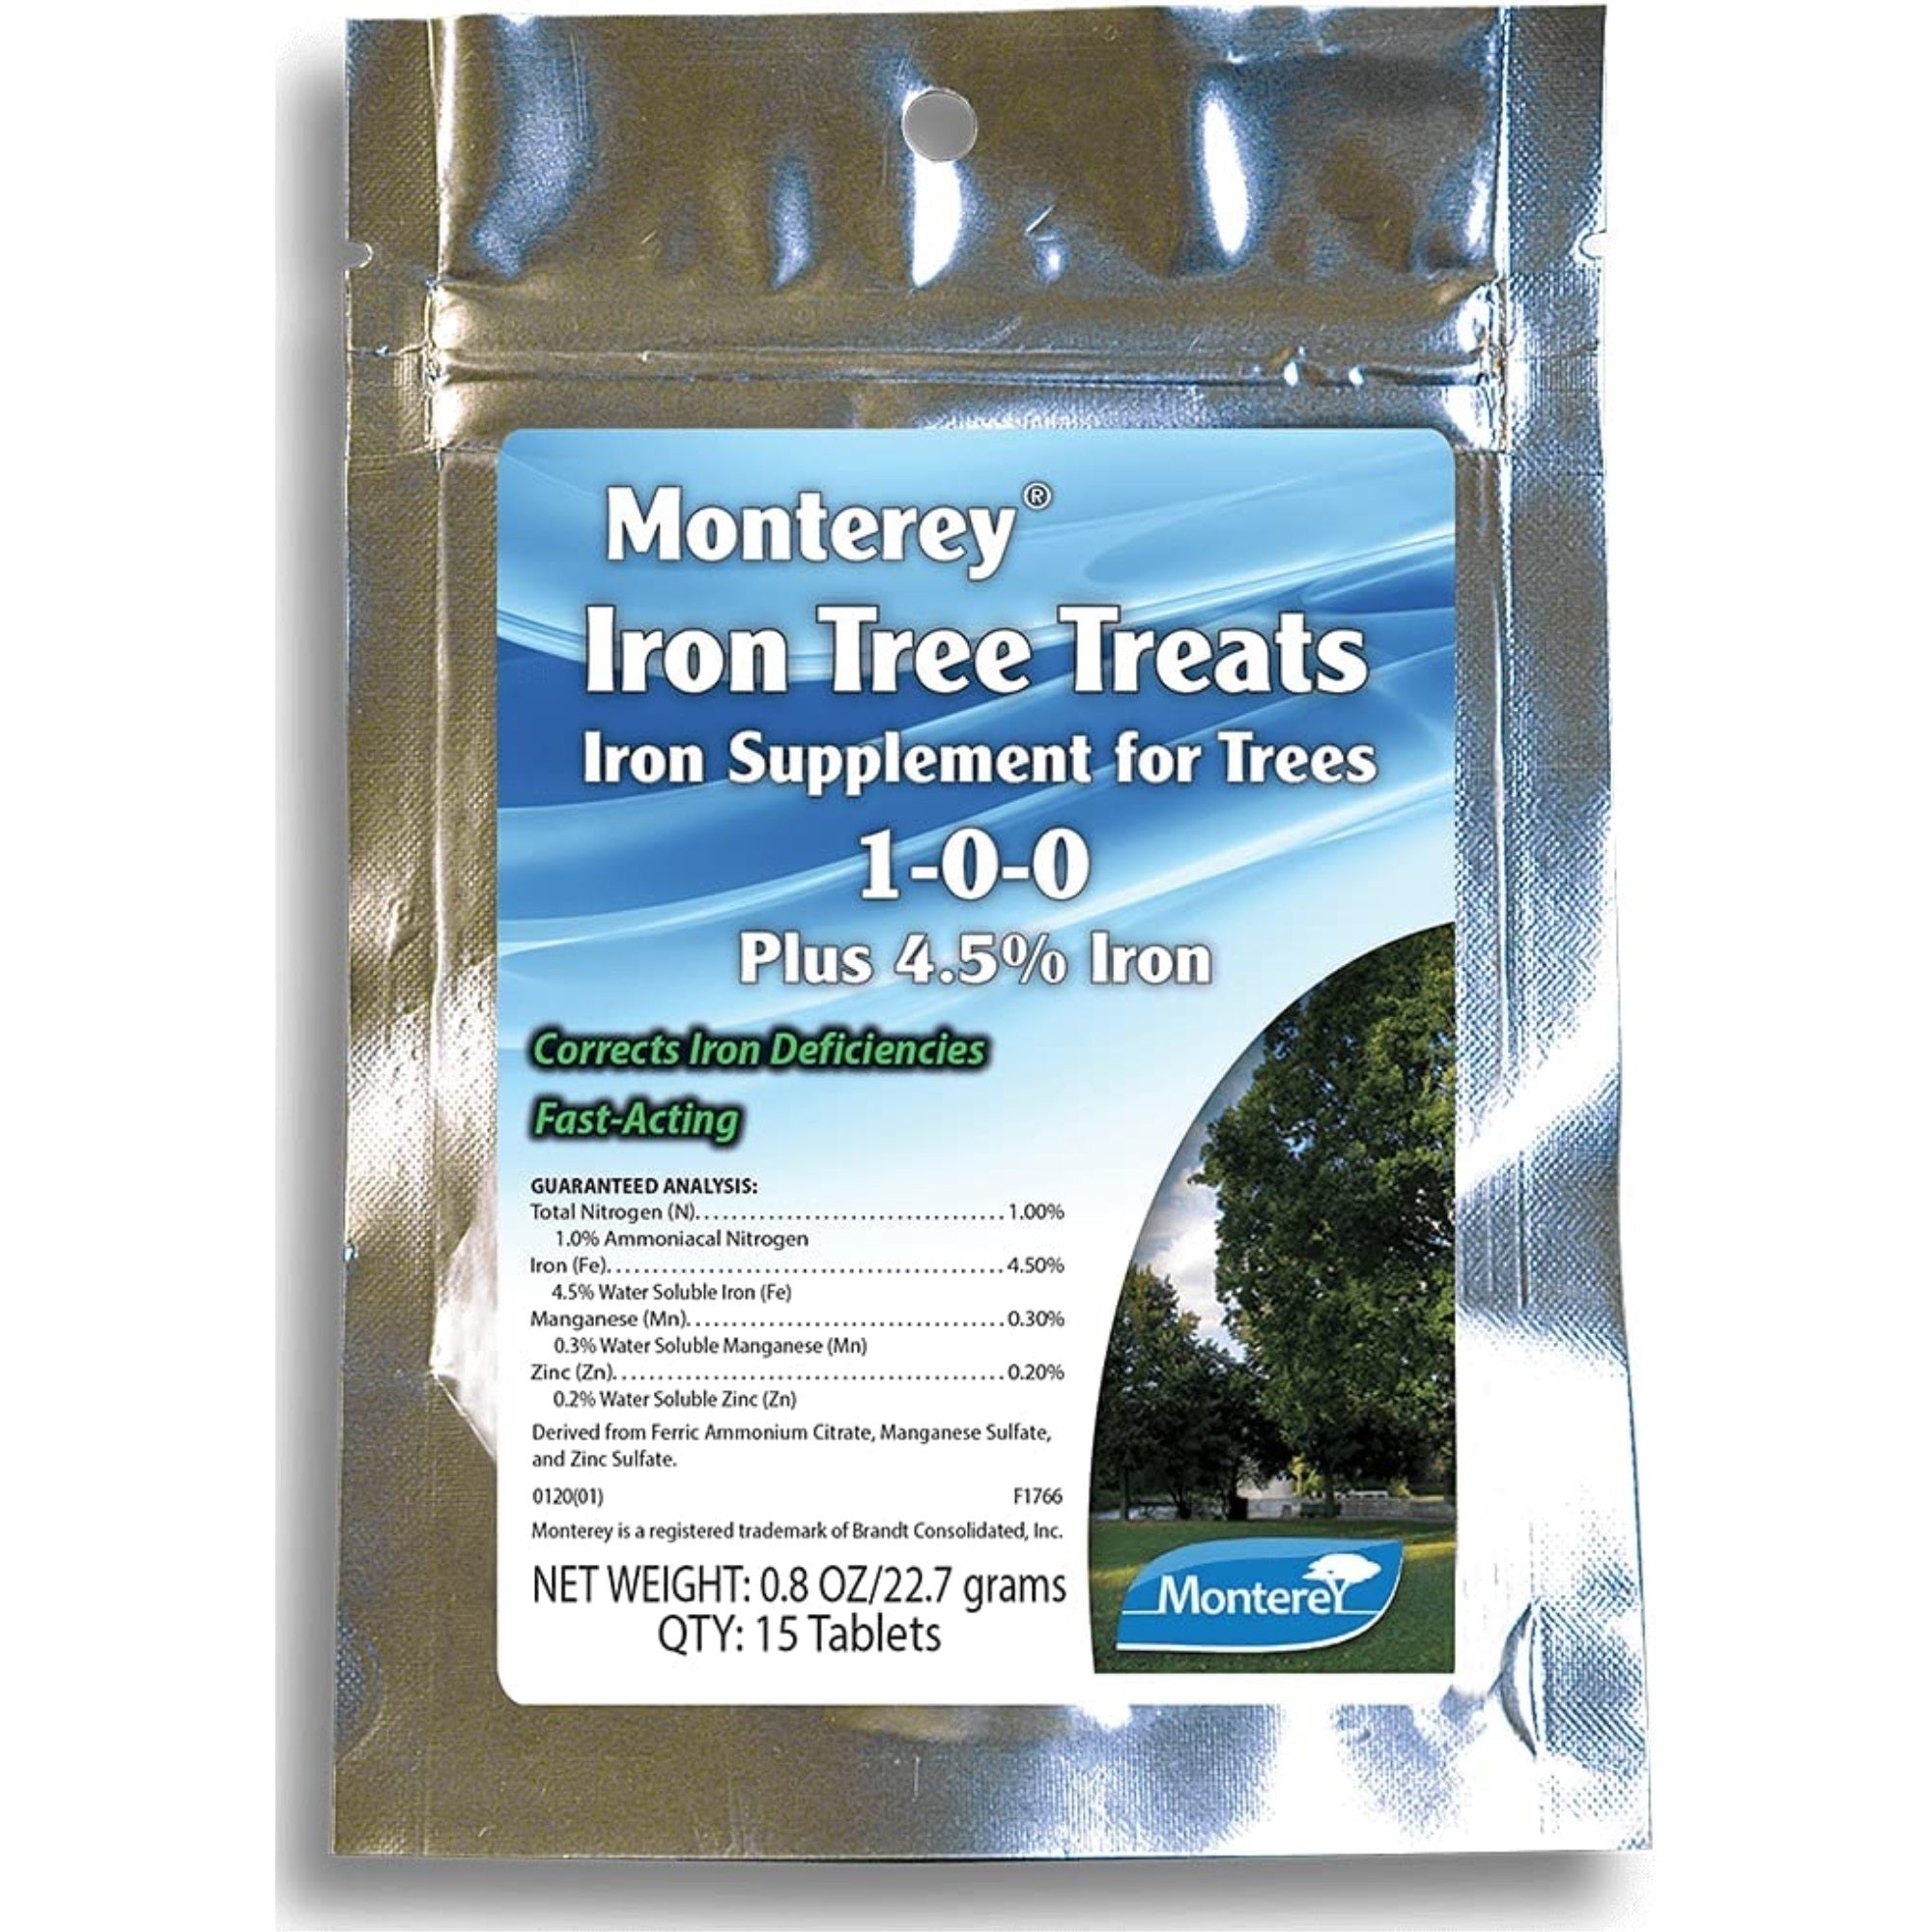 Monterey Iron Tree Treats Supplement For Trees 1-0-0 Plus 4.5% Iron, 15 Tablets, 0.8 Ounces